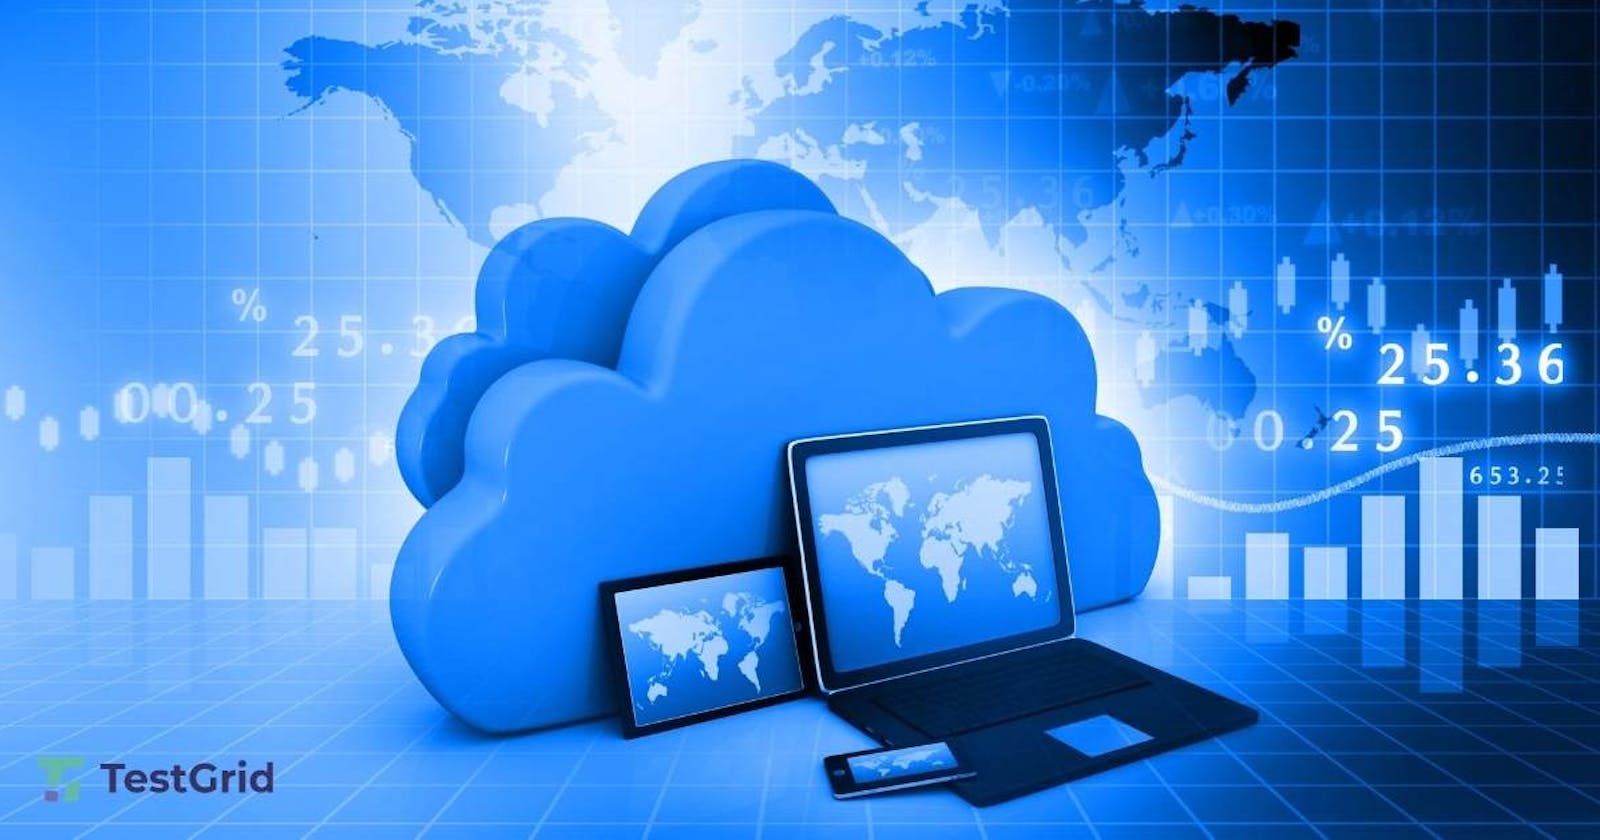 Public vs Private vs Hybrid Cloud: Which One Should You Use?